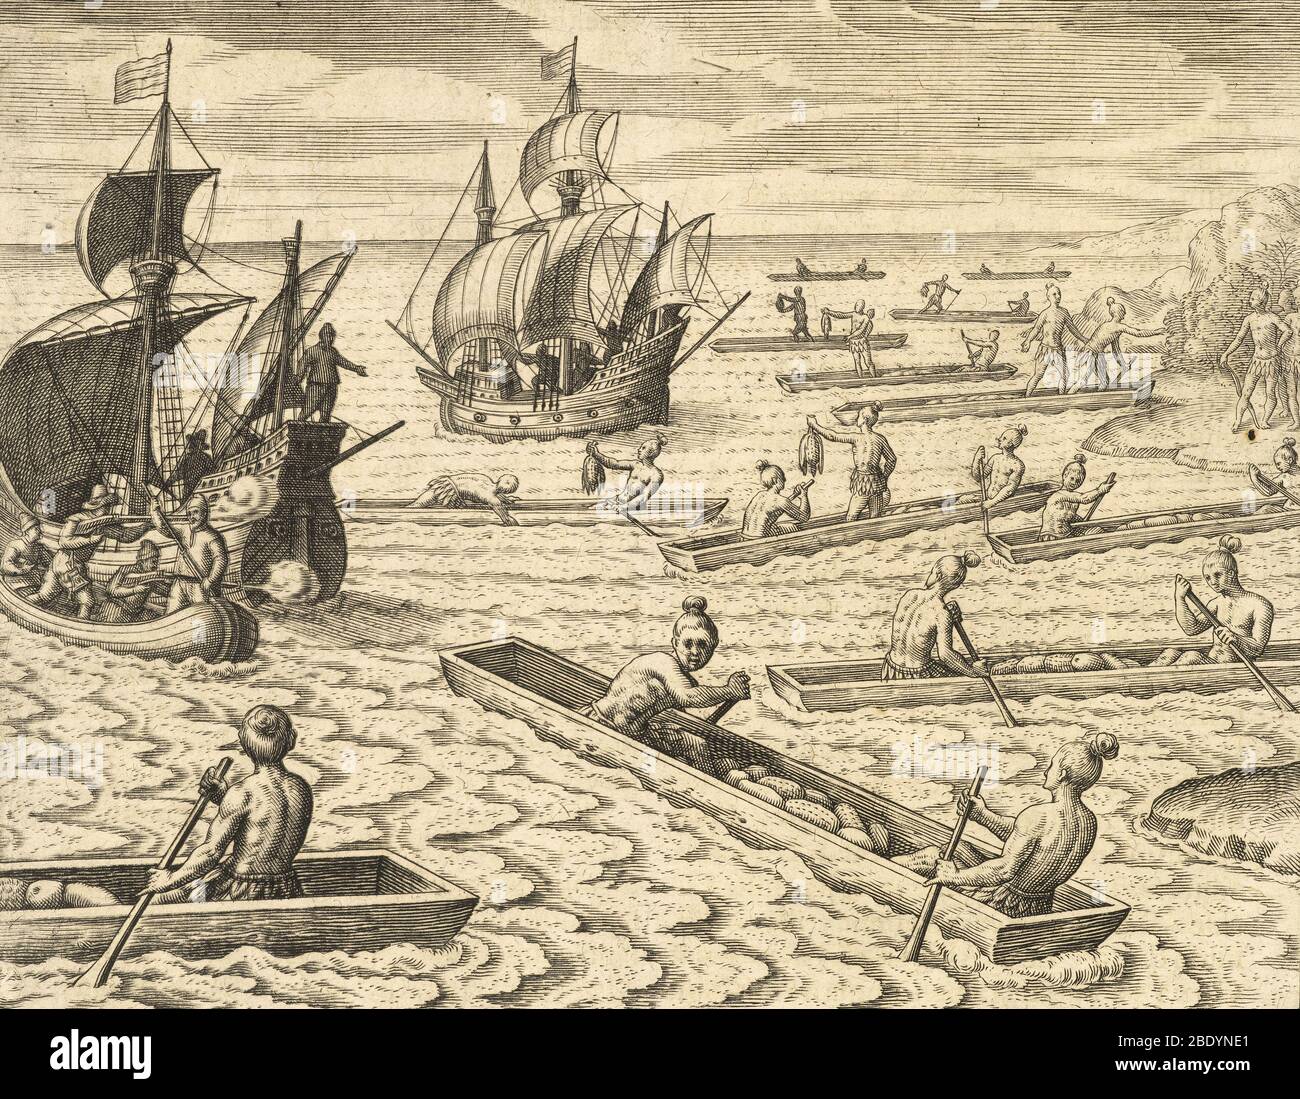 Indigenous People Approaching Ships, 16th C Stock Photo